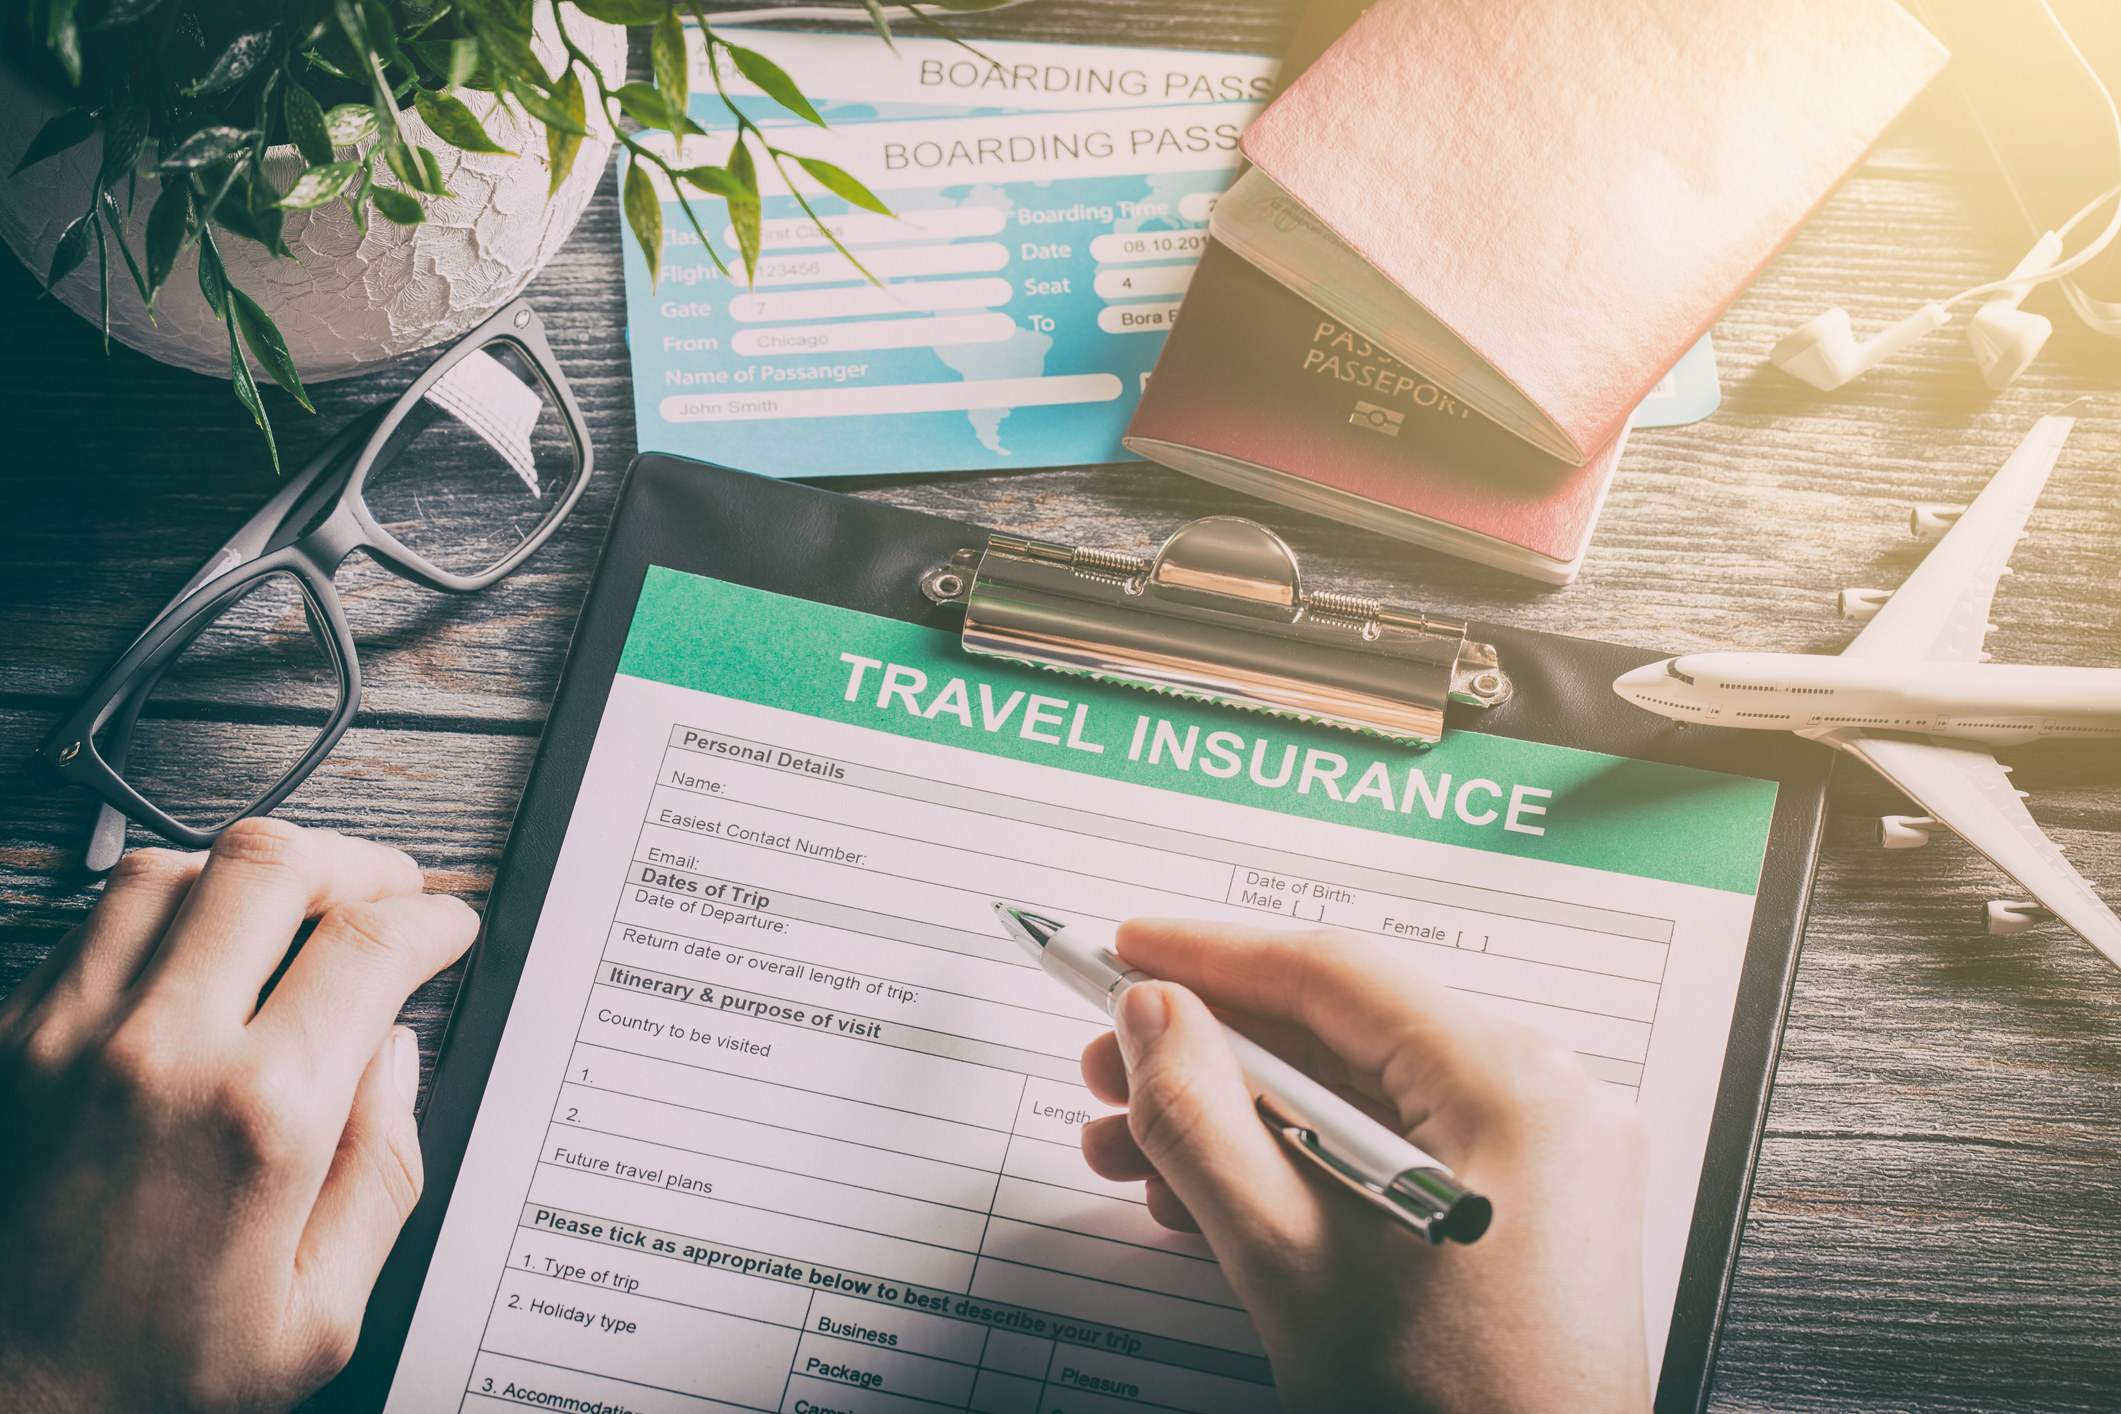 a person signing up for travel insurance